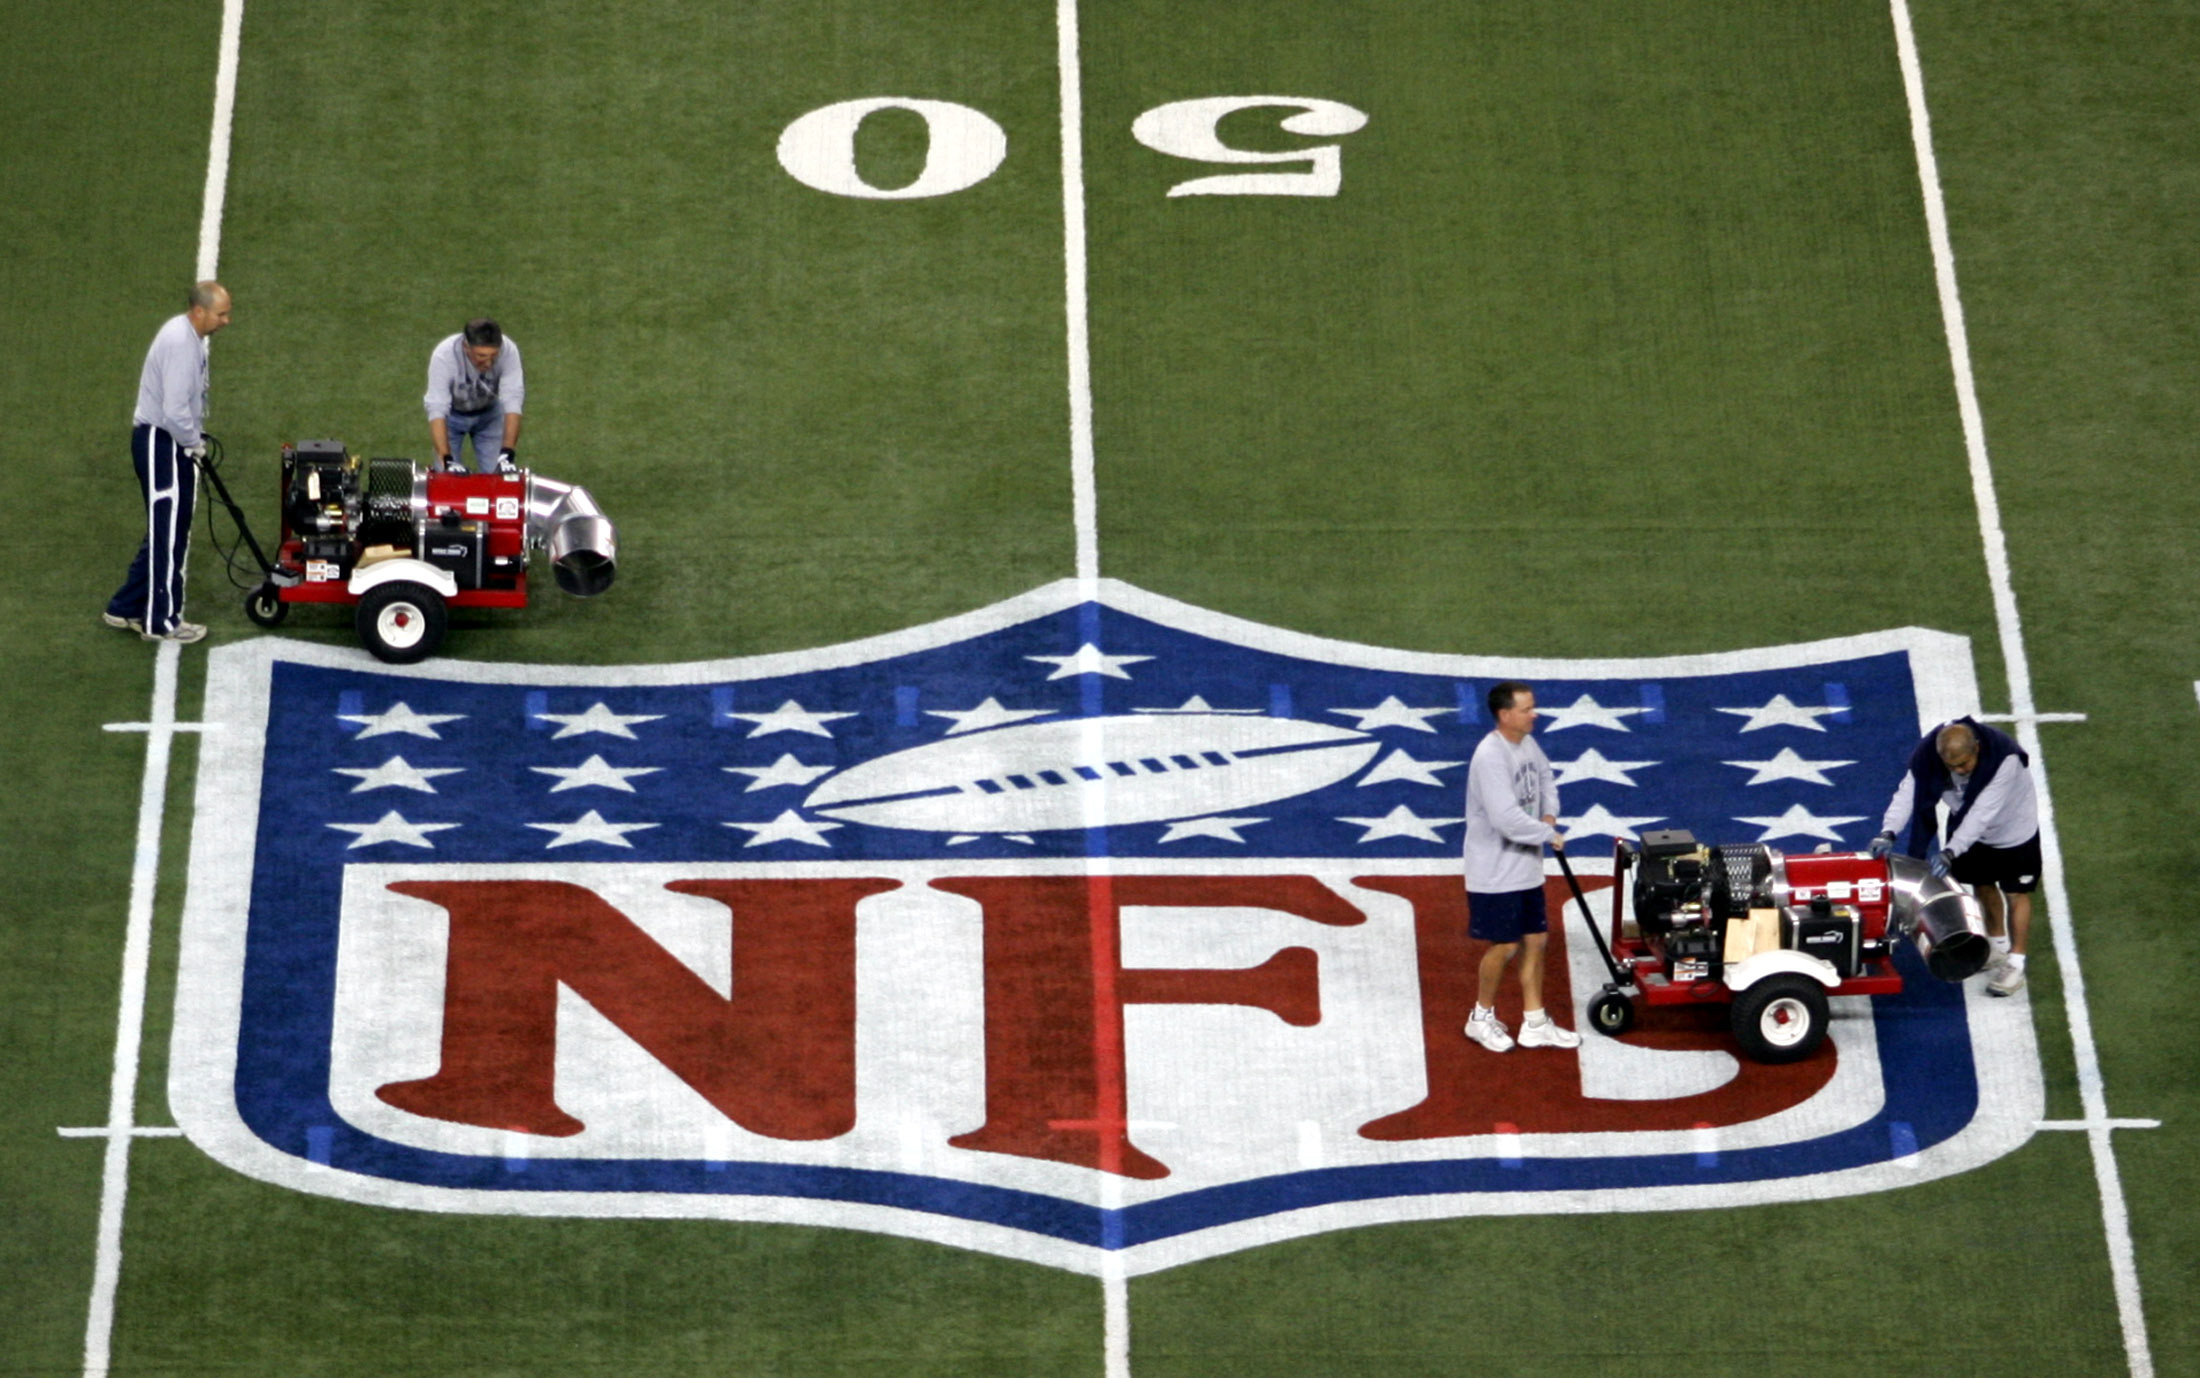 Stadium workers at Ford Field prepare surface for Super Bowl in Detroit, Michigan